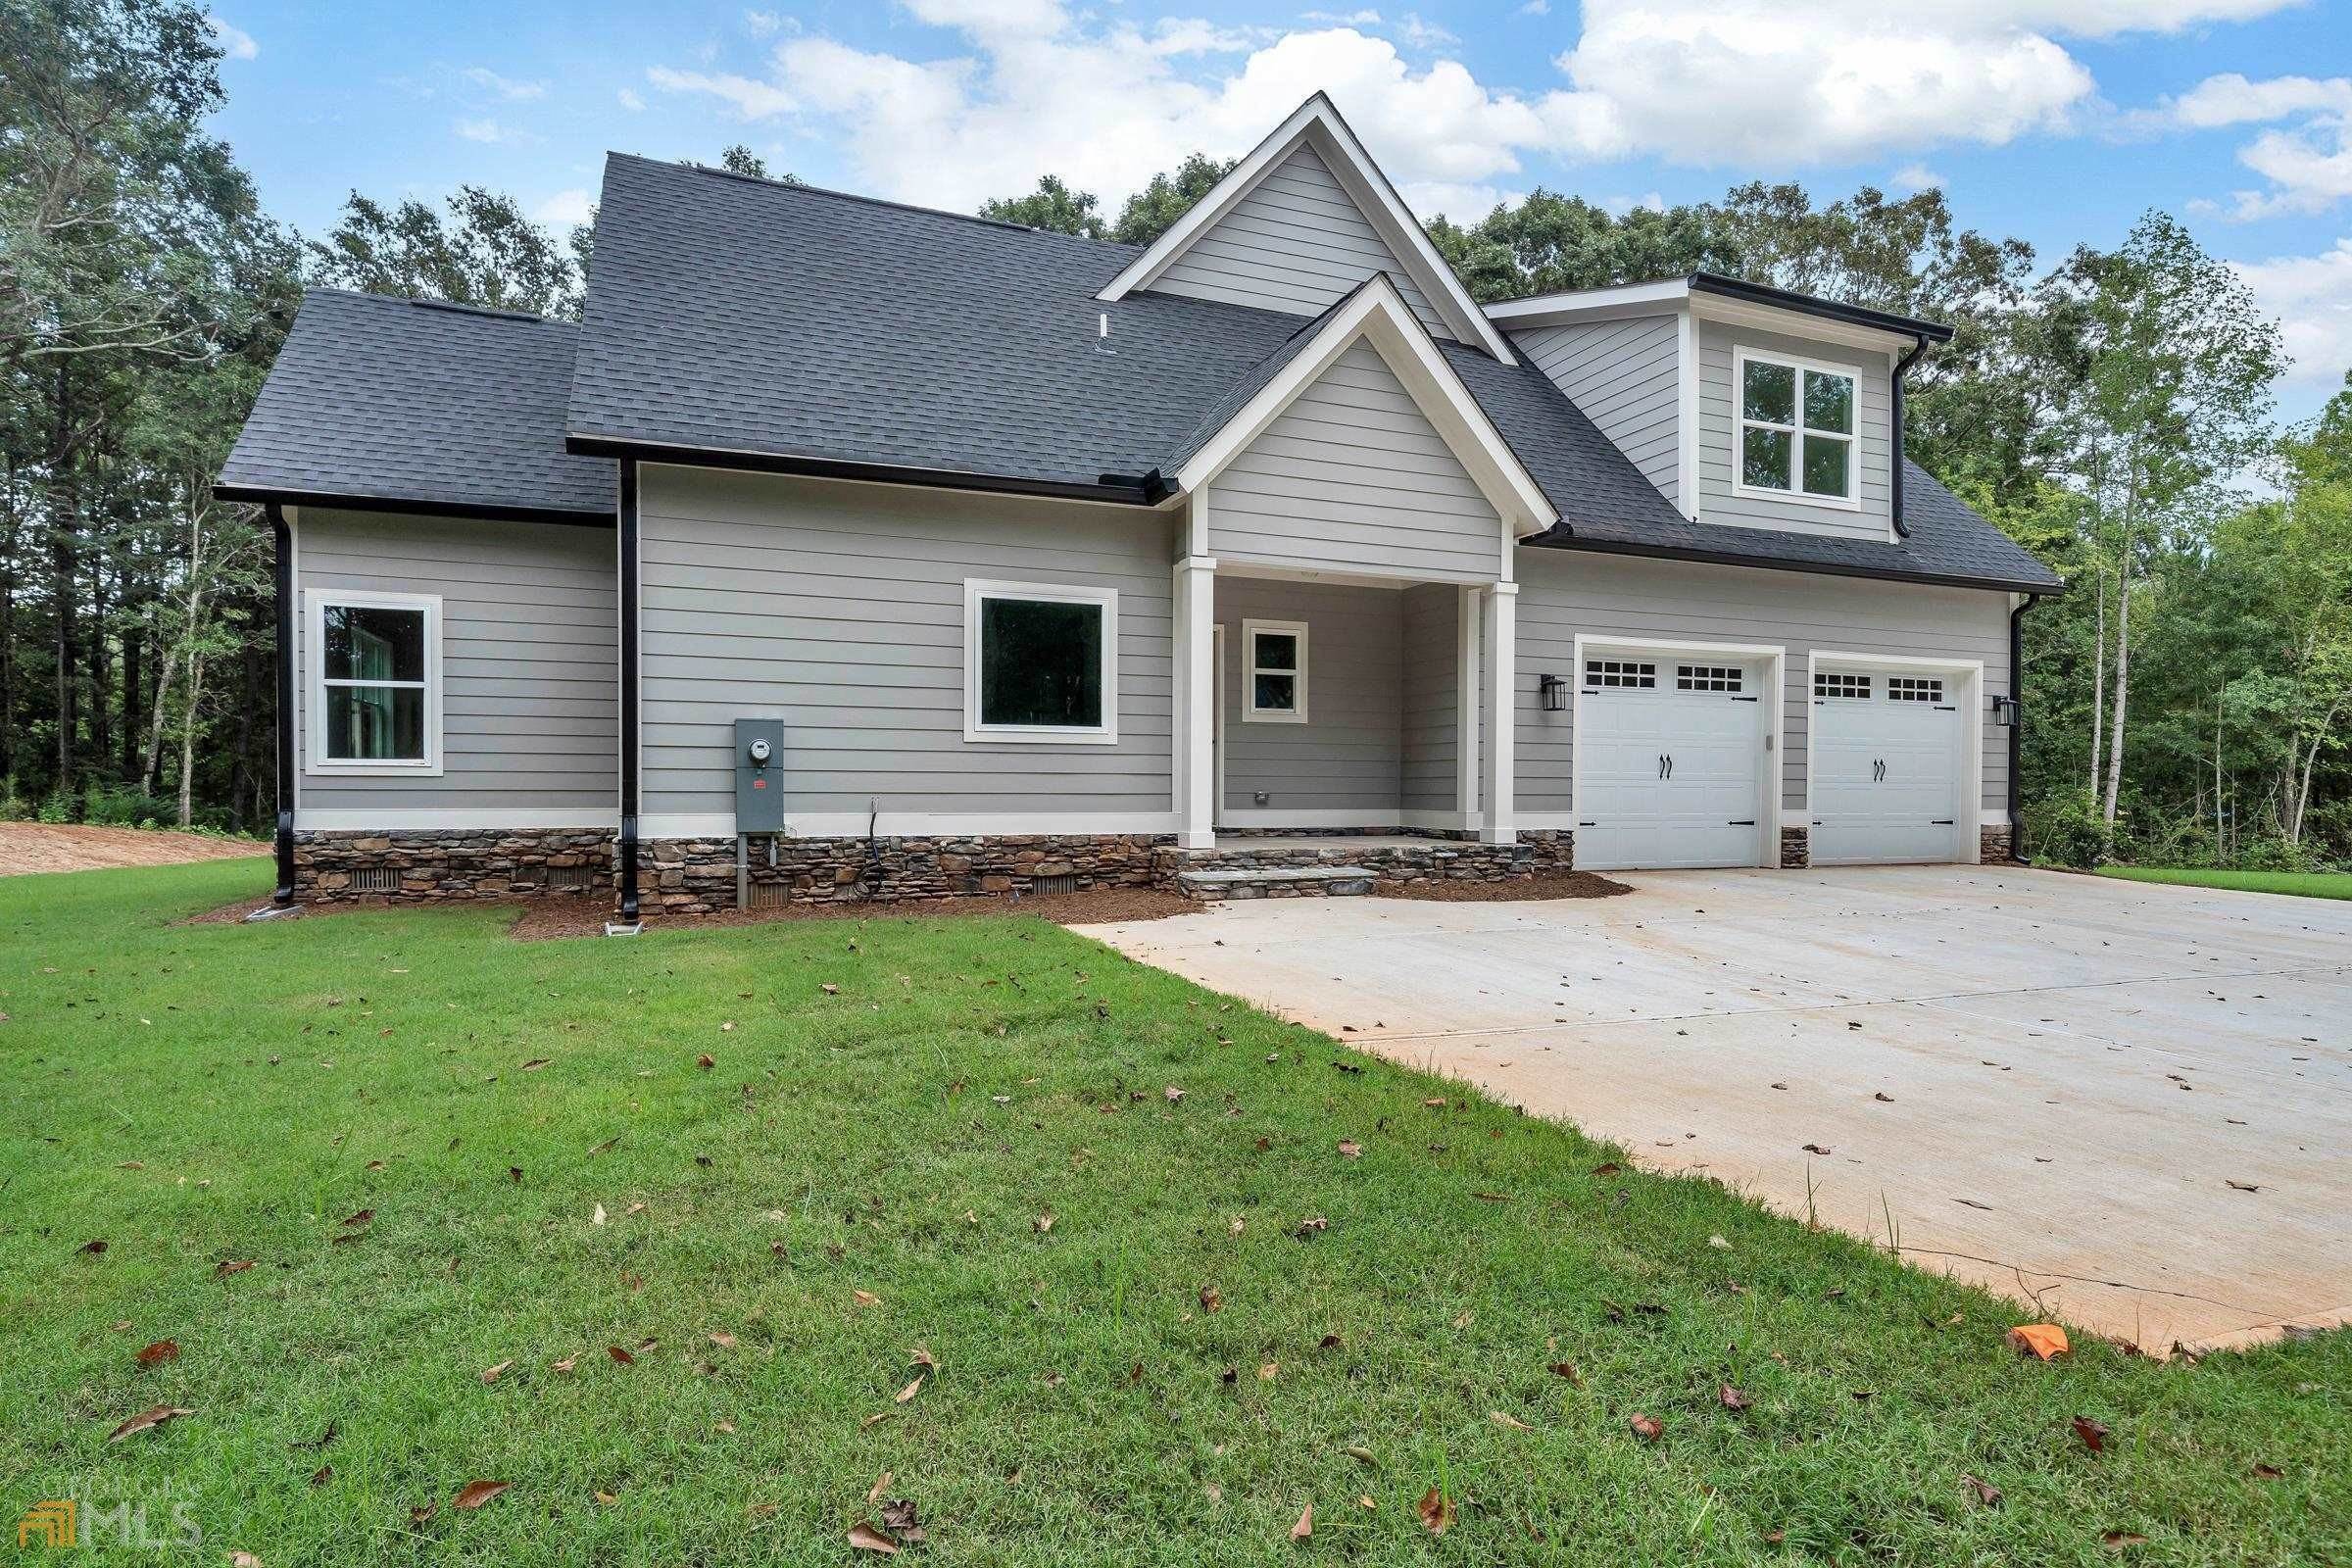 34. Single Family for Sale at Madison, GA 30650